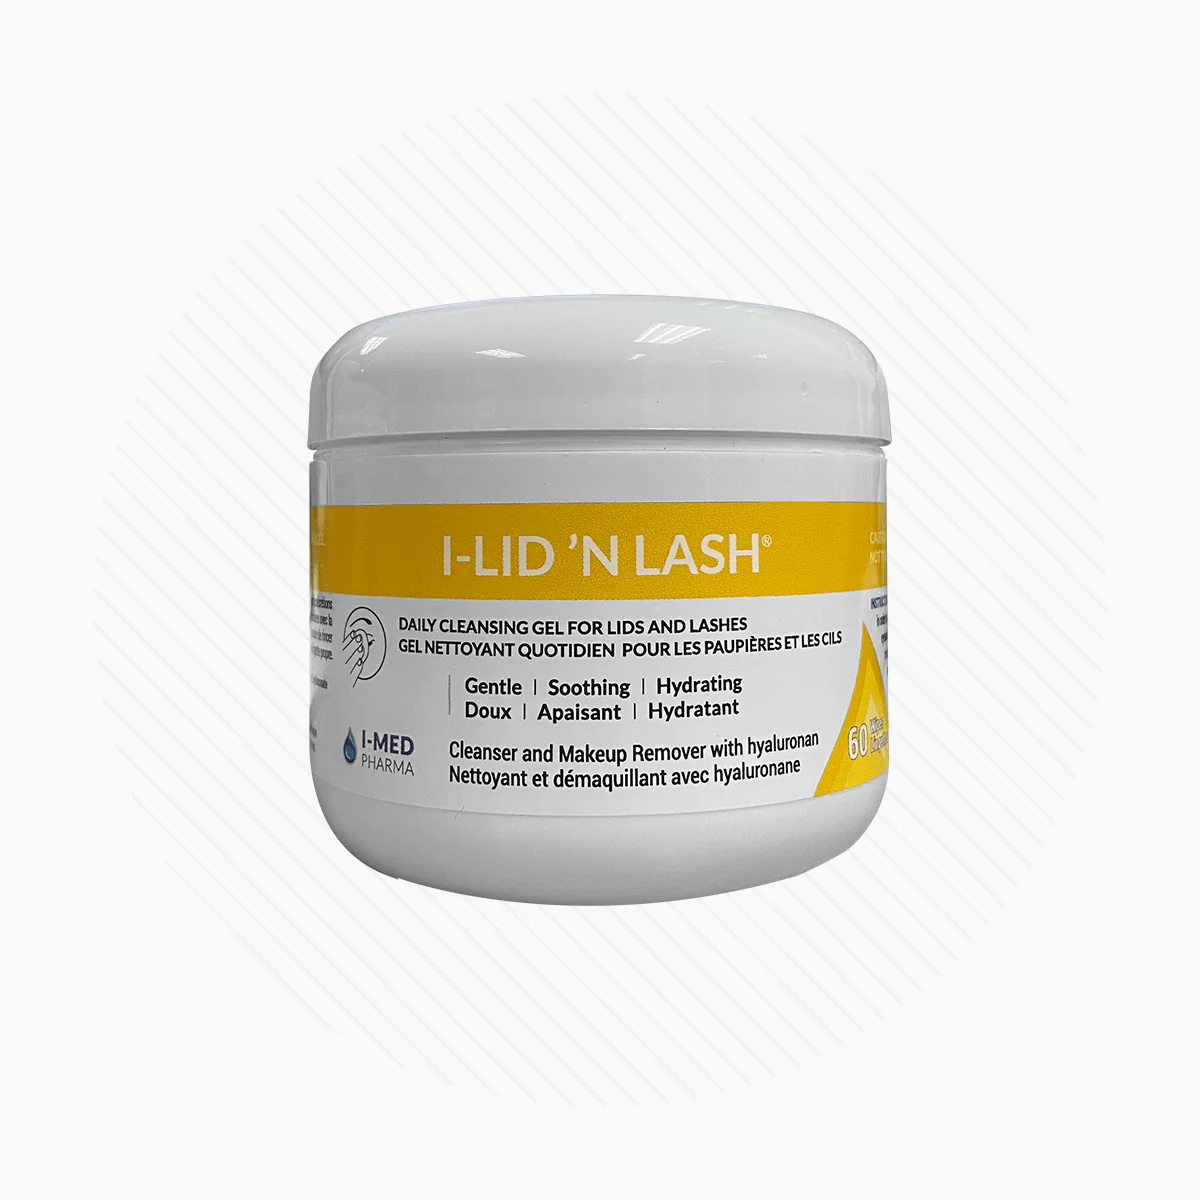 I-Lid ’n Lash Lid and Lash Hygiene Wipes to Cleanse and Hydrate